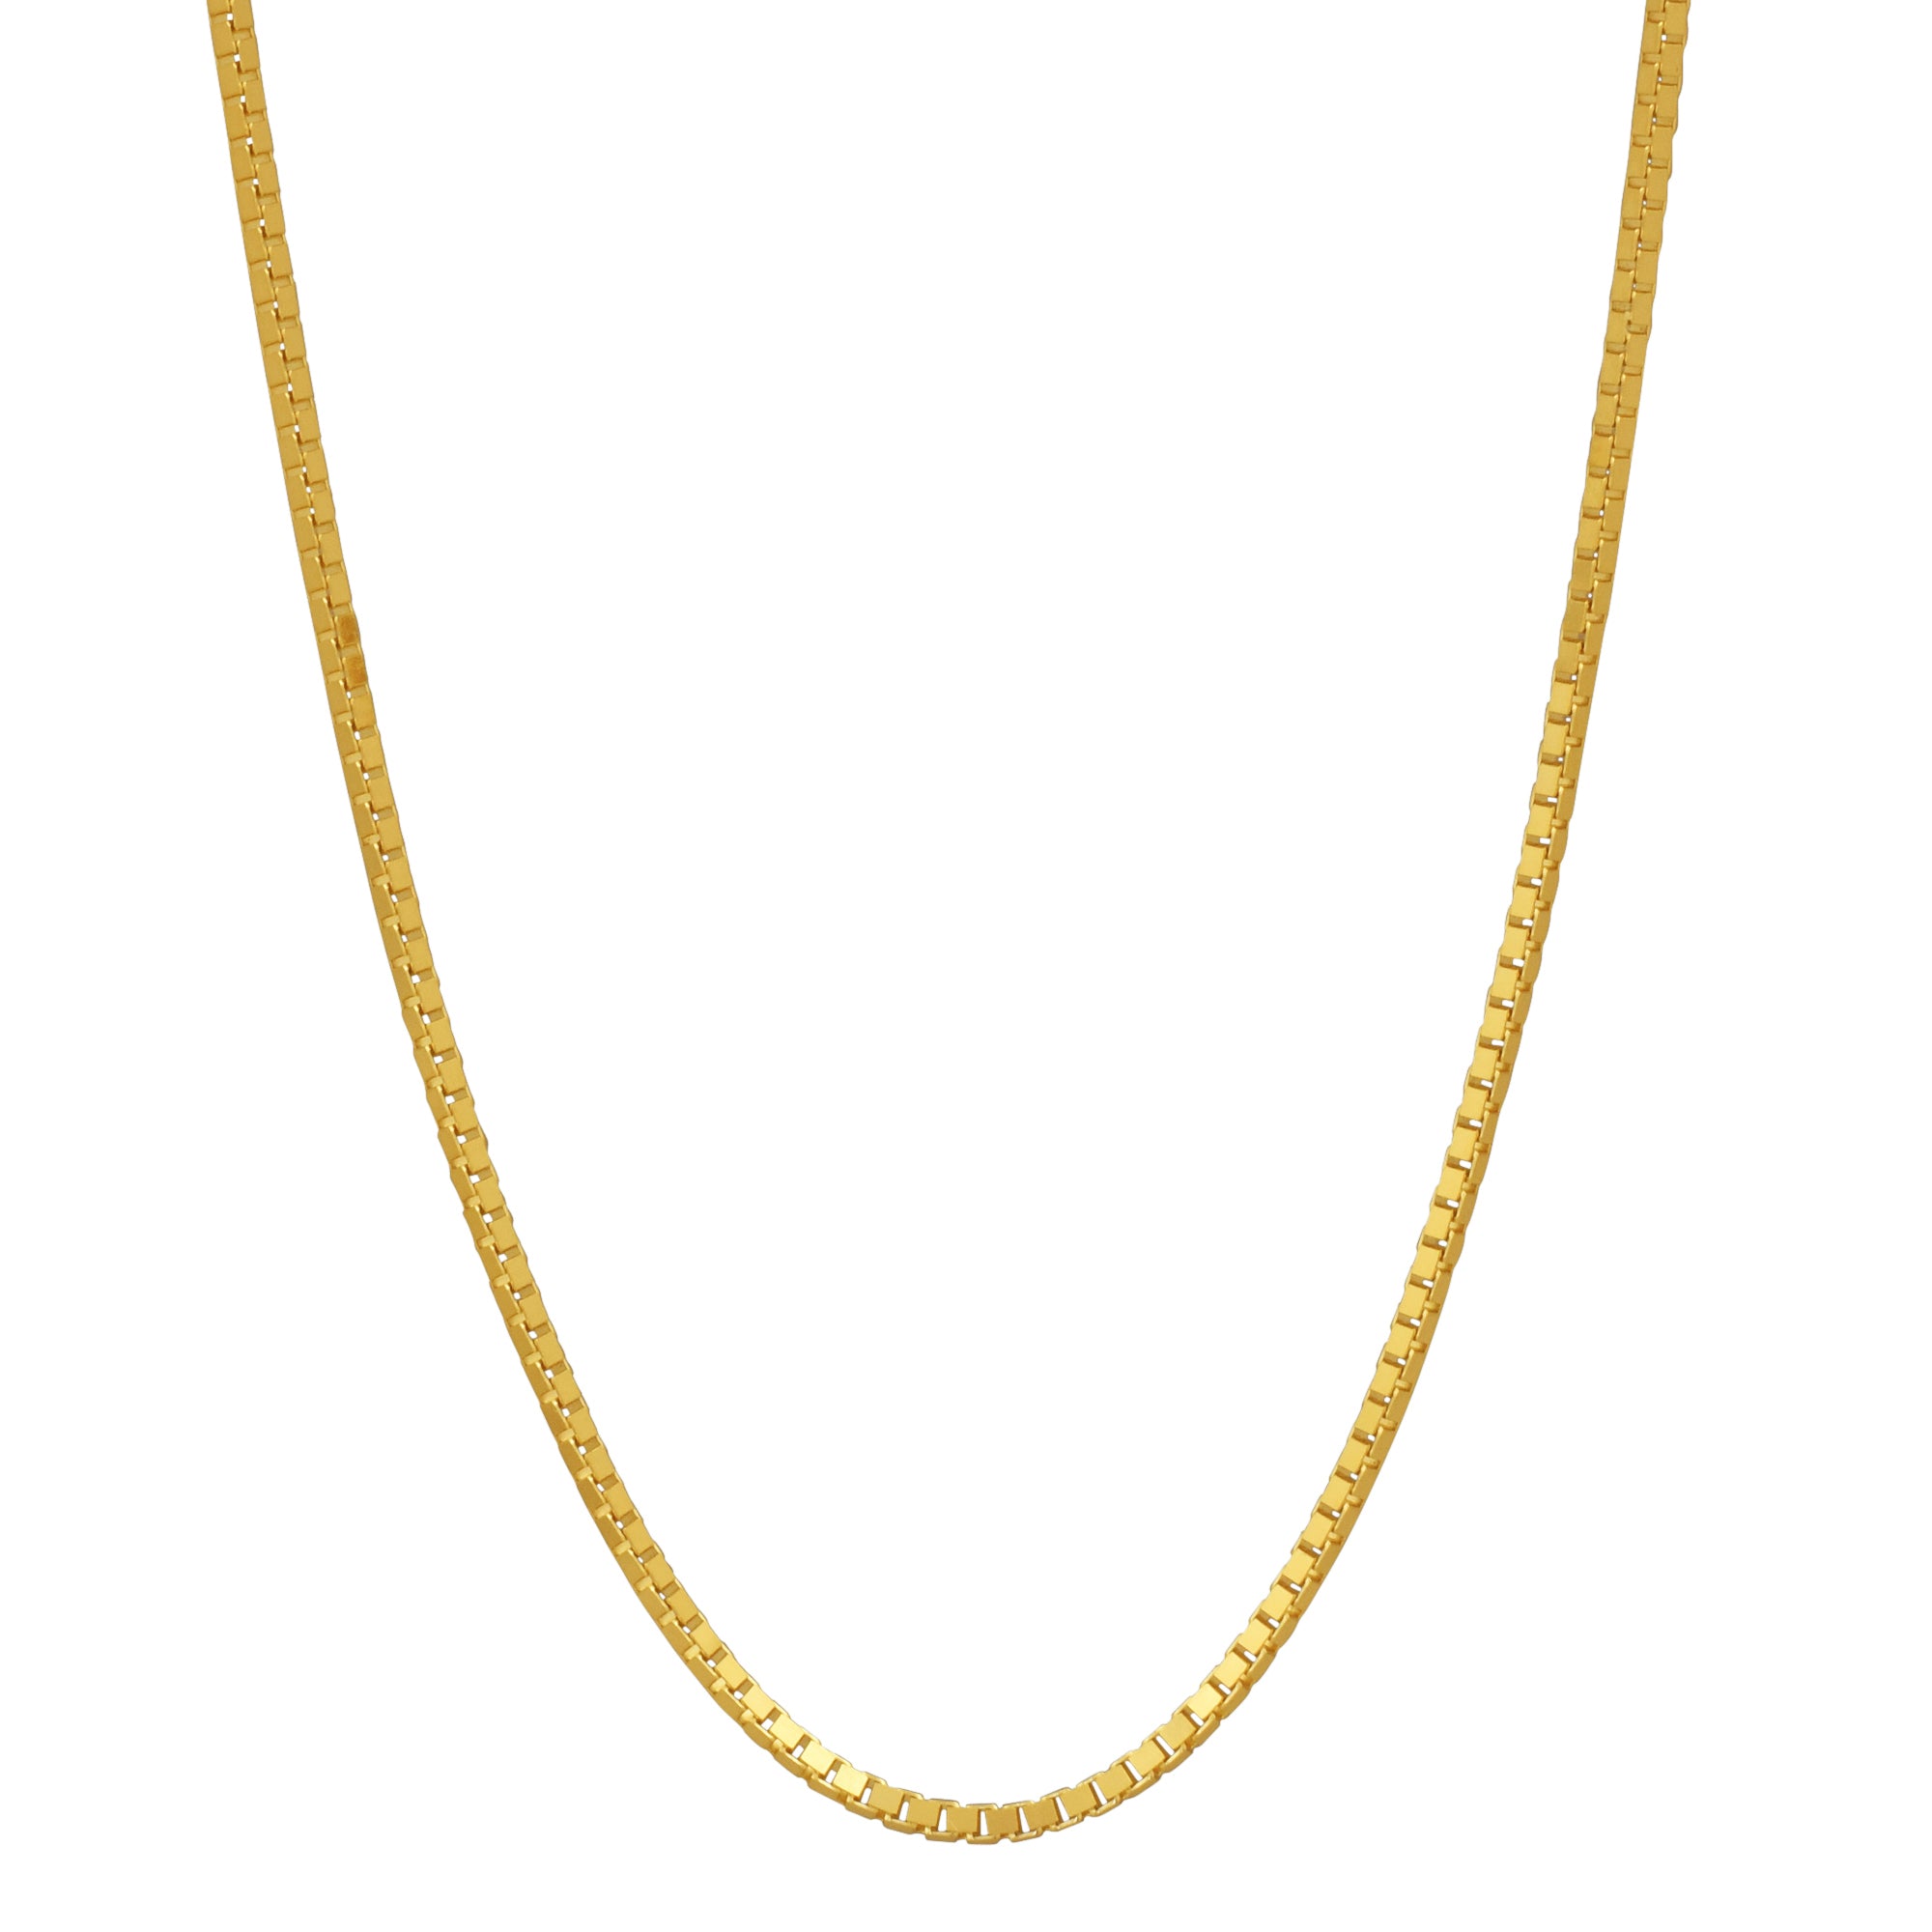 Box Chain in 14kt Yellow Gold (18 inches and .8mm wide)